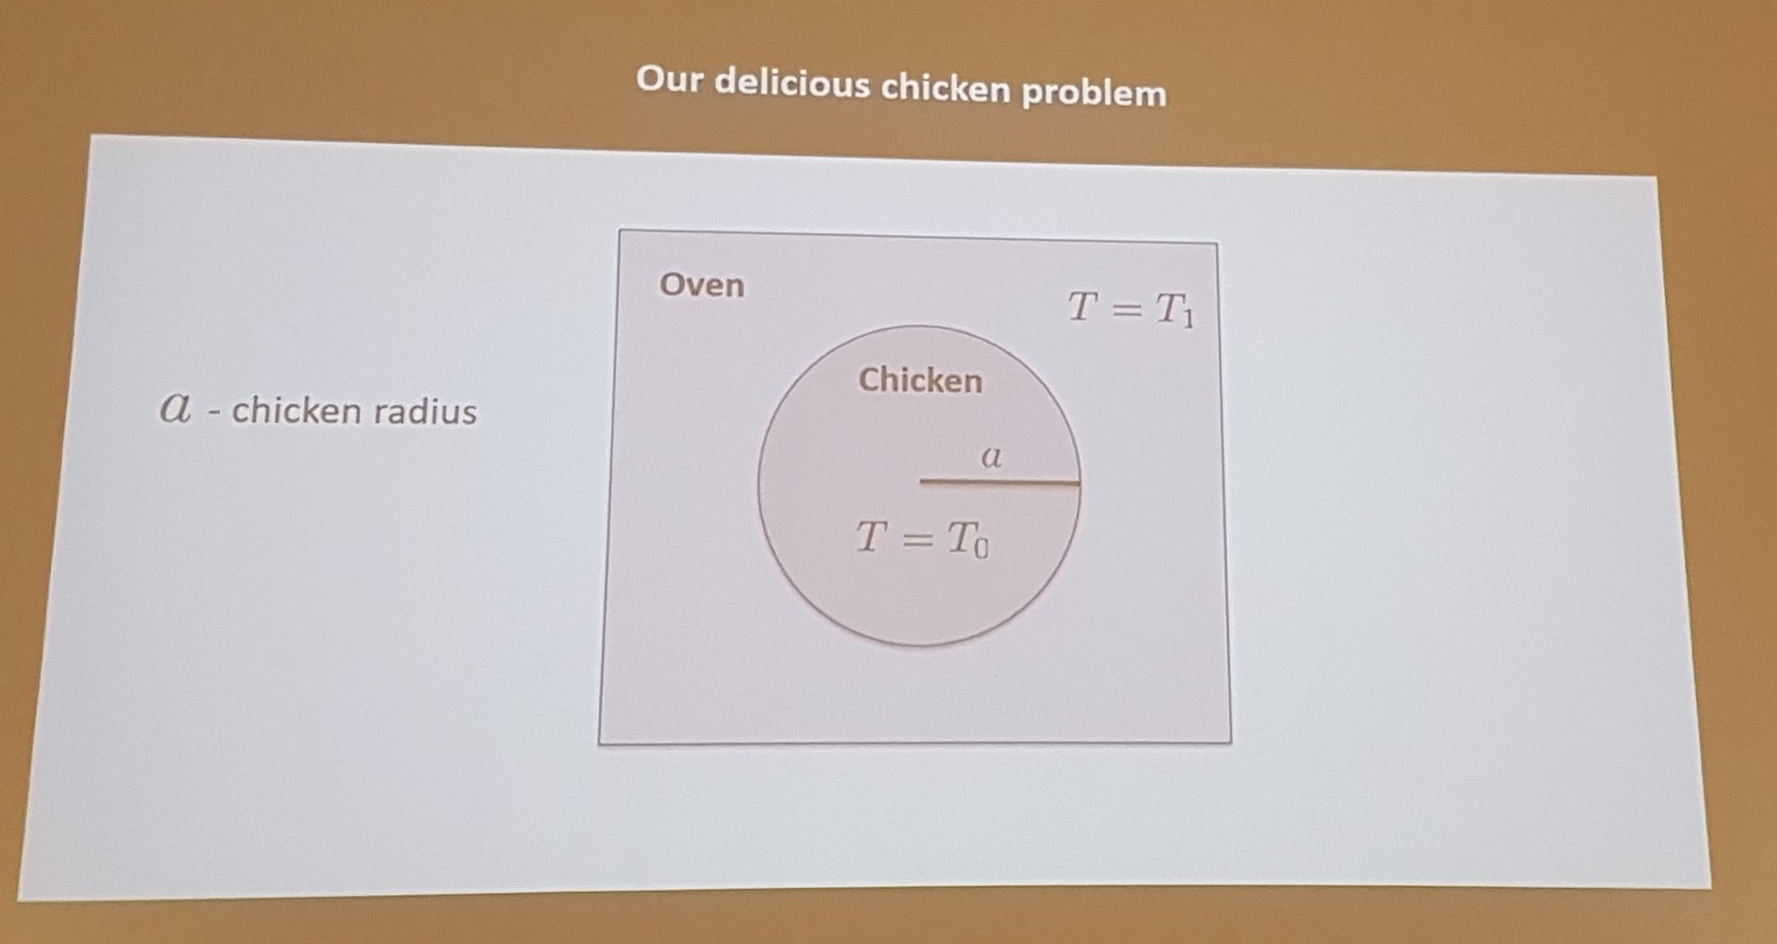 Photo of a PowerPoint slide titled "Our delicious chicken problem".